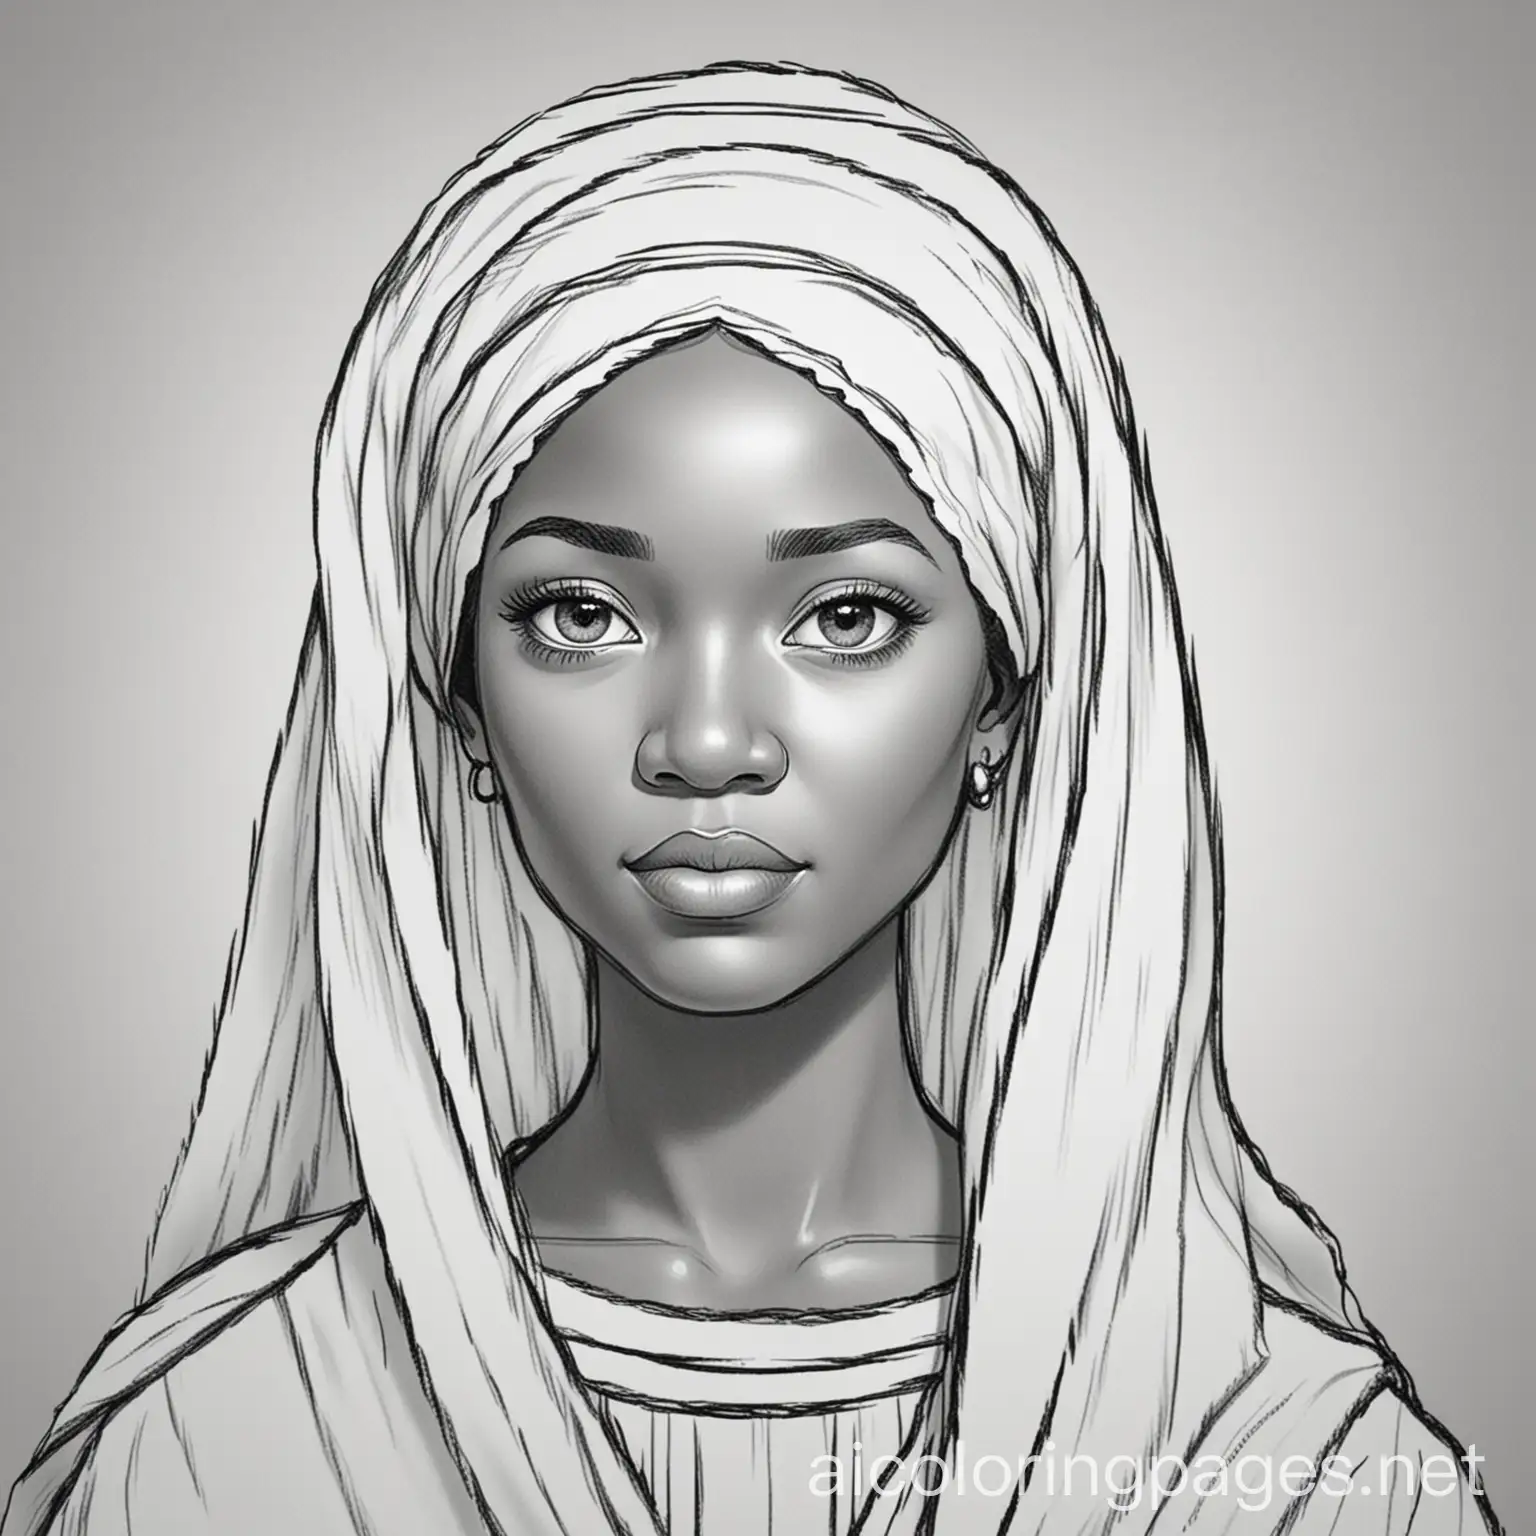 black women Mary from the bible coloring pages, Coloring Page, black and white, line art, white background, Simplicity, Ample White Space. The background of the coloring page is plain white to make it easy for young children to color within the lines. The outlines of all the subjects are easy to distinguish, making it simple for kids to color without too much difficulty